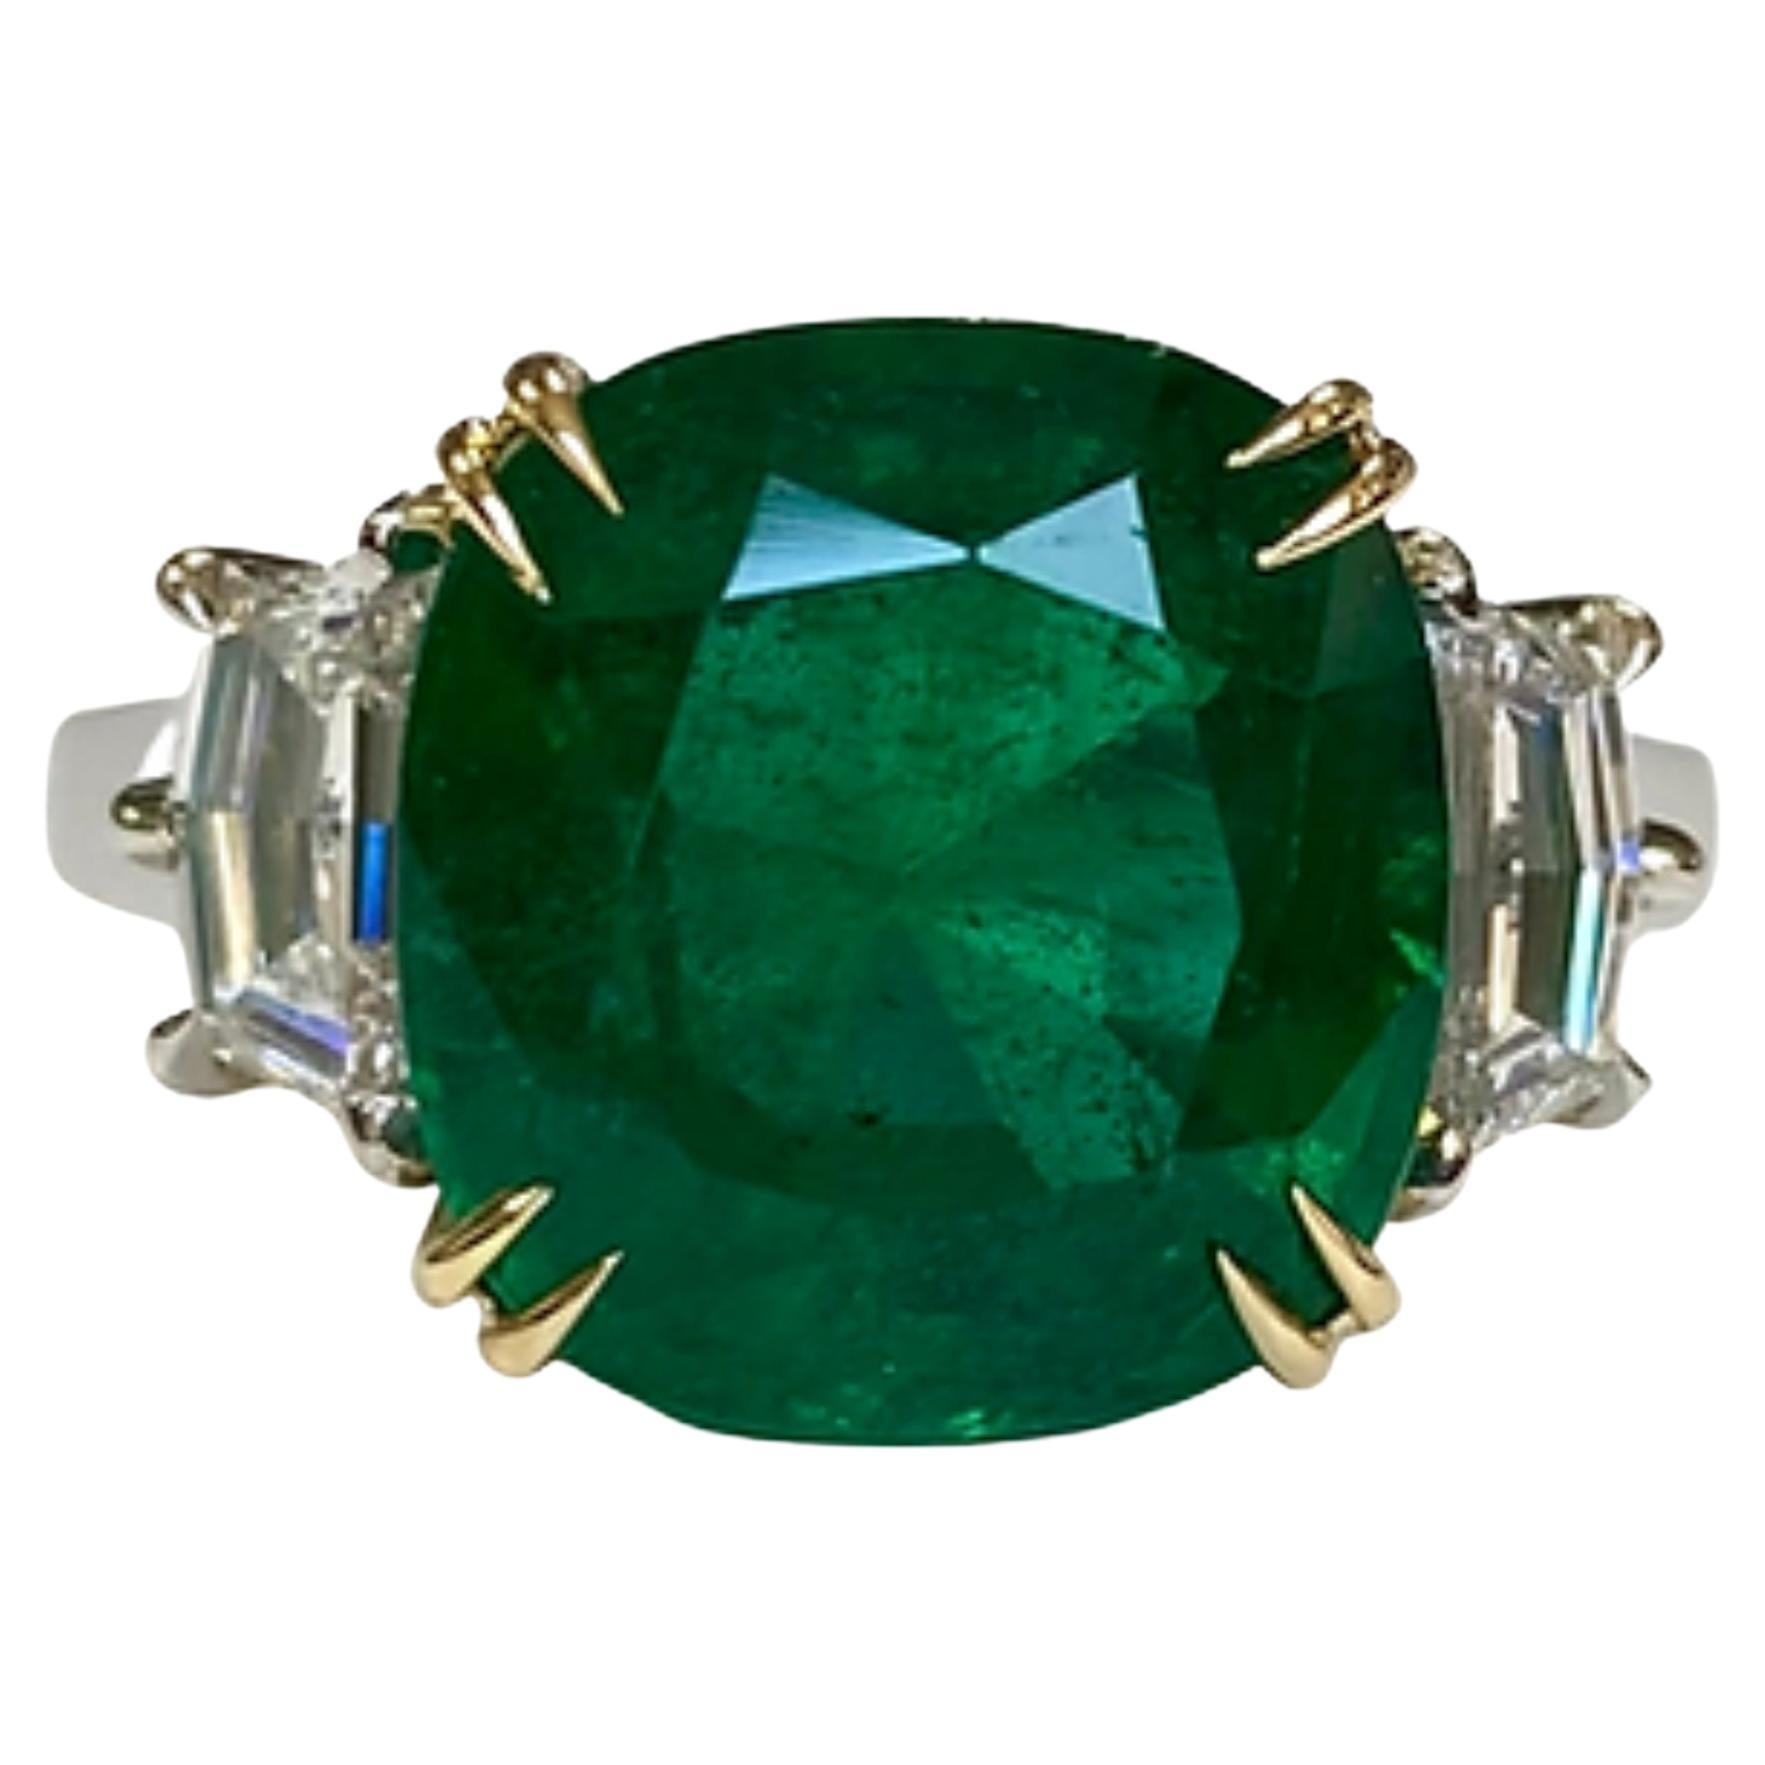 For Sale:  Art Deco 6 CT Natural Emerald Diamond Engagement Ring in 18k Gold, Cocktail Ring